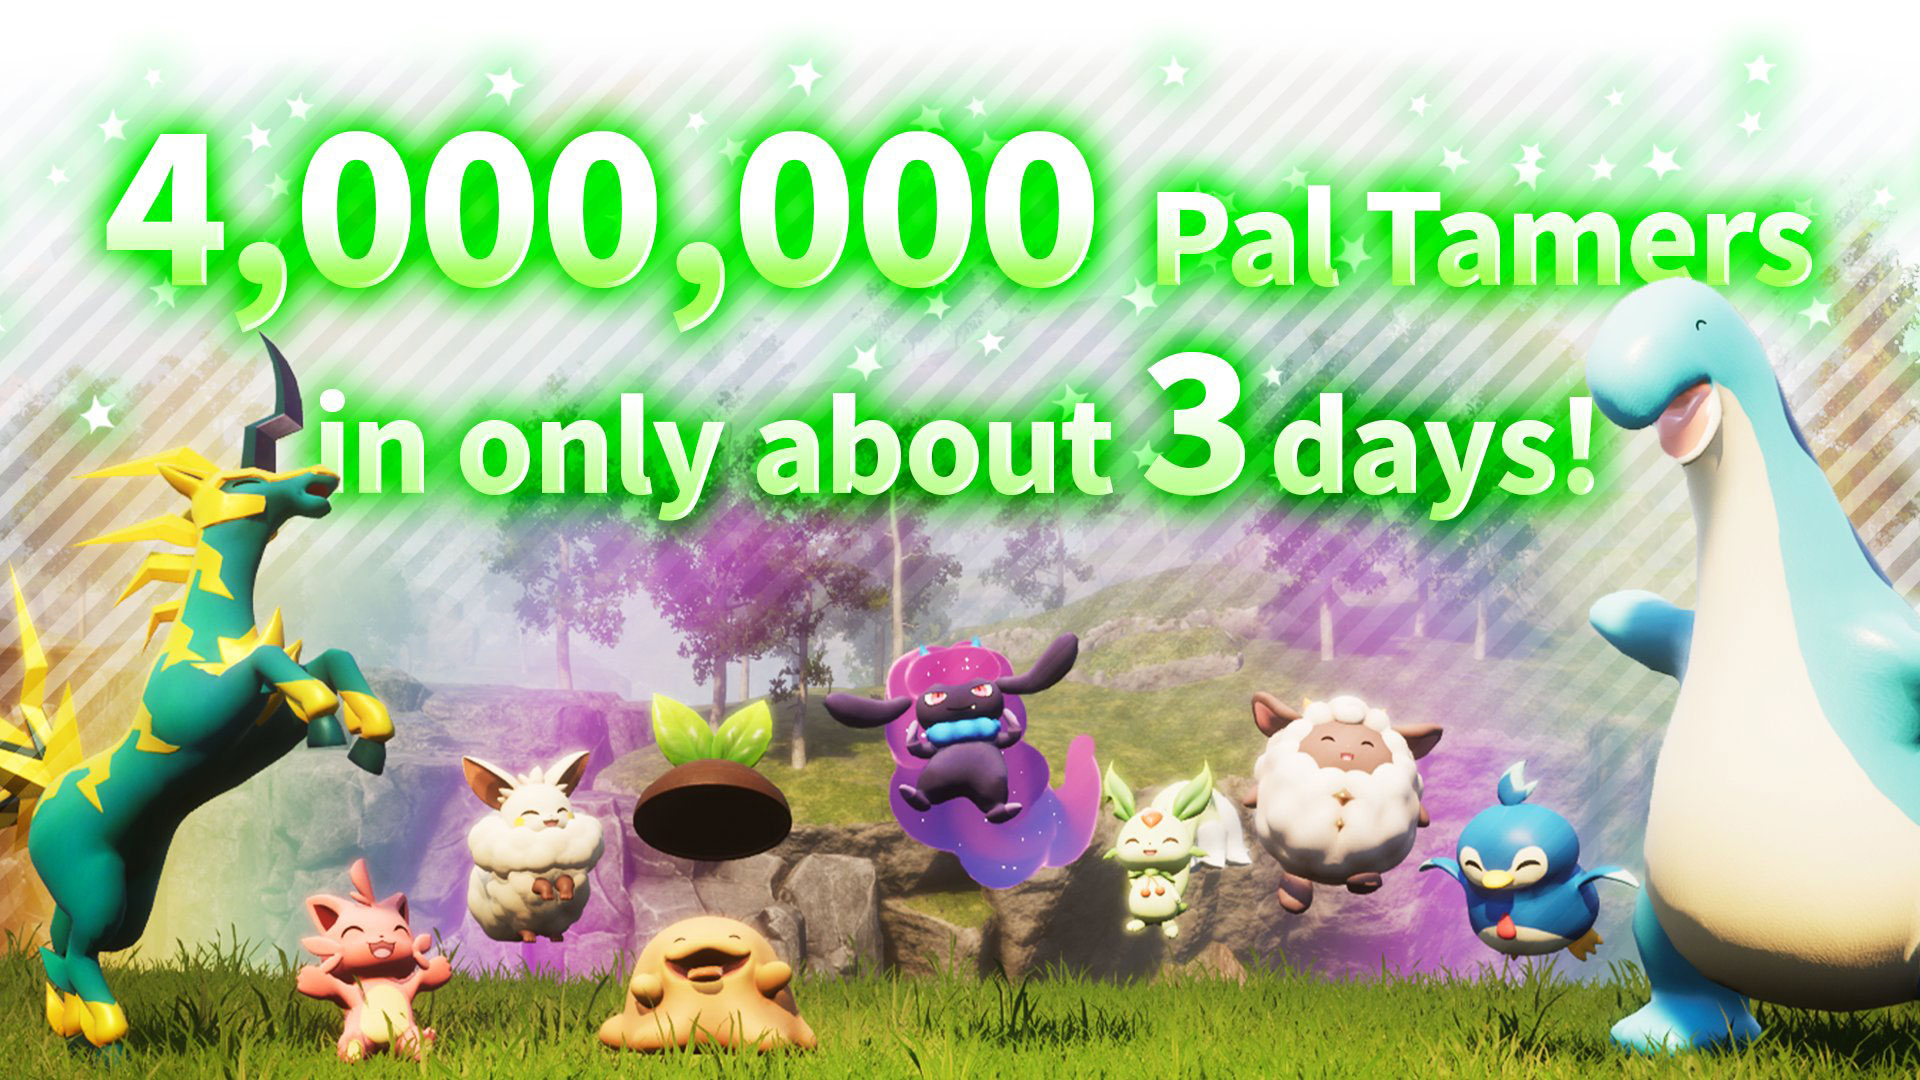 Palworld sold over four million copies in about three days